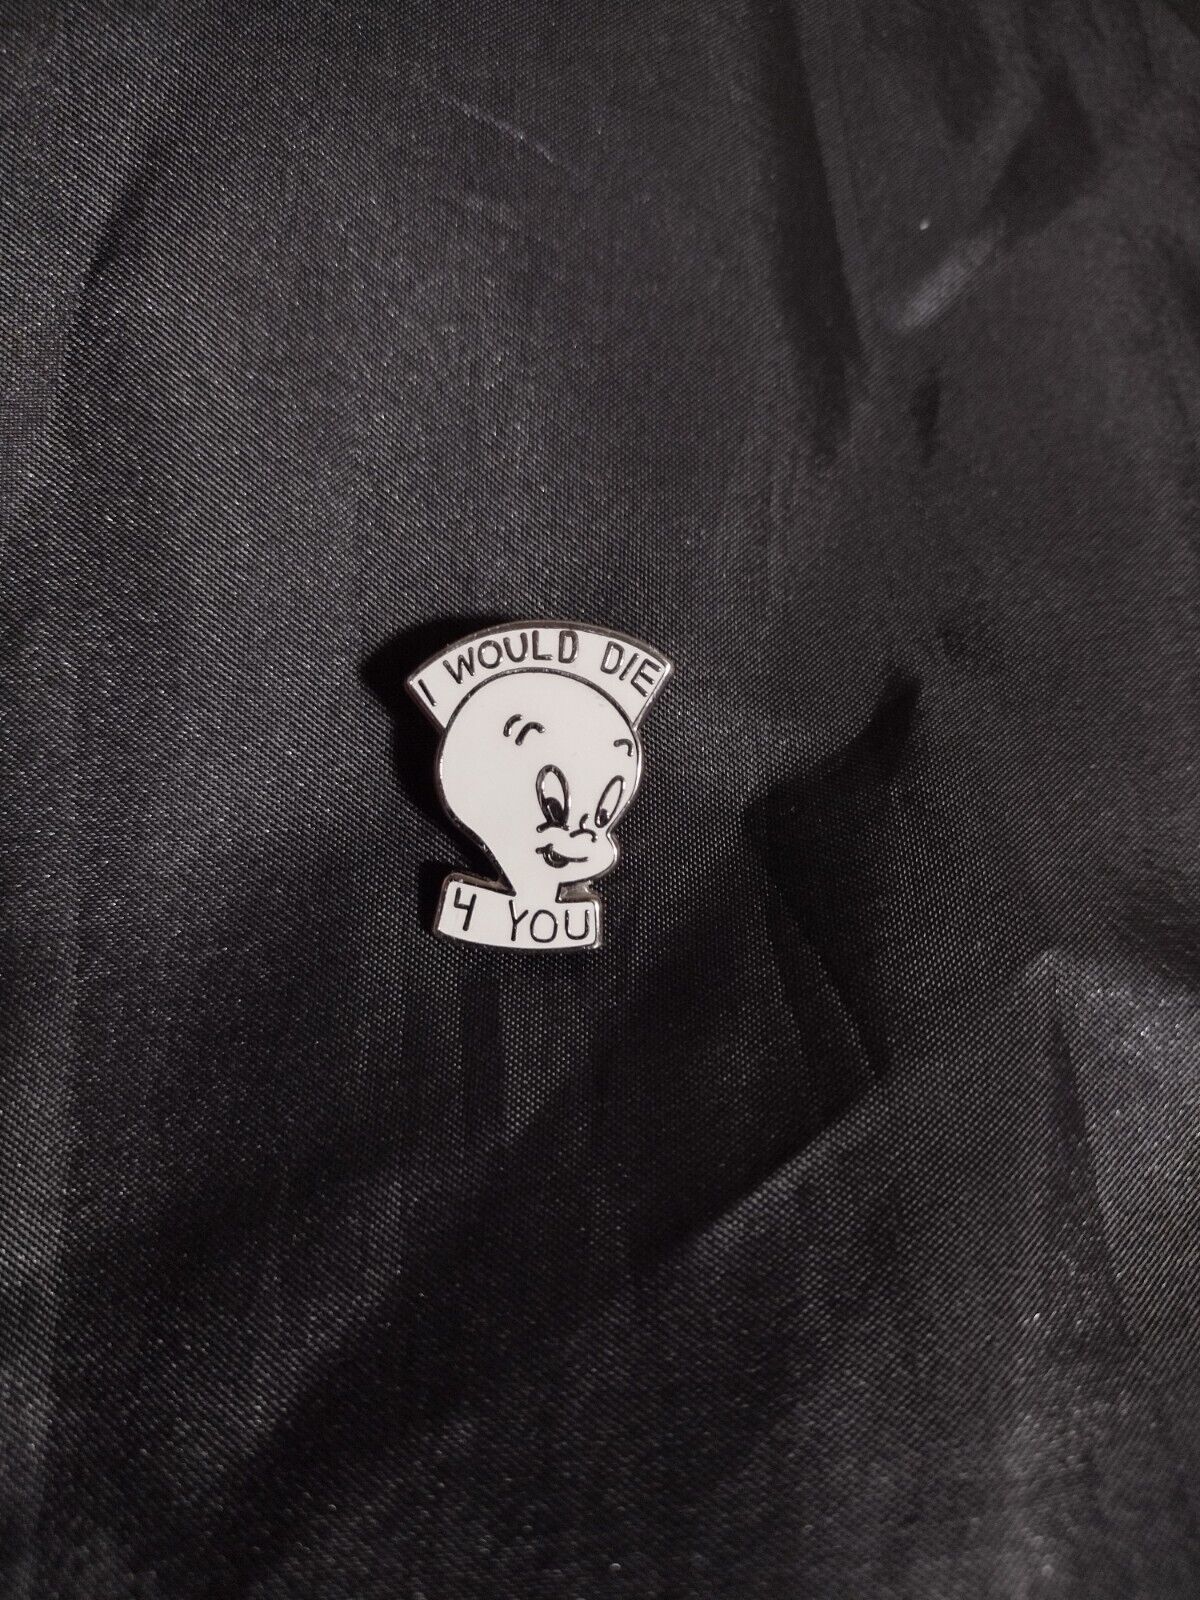 Rare Pintrill × Justin Hager Casper I Would Die 4 You Pin Limited Edition 